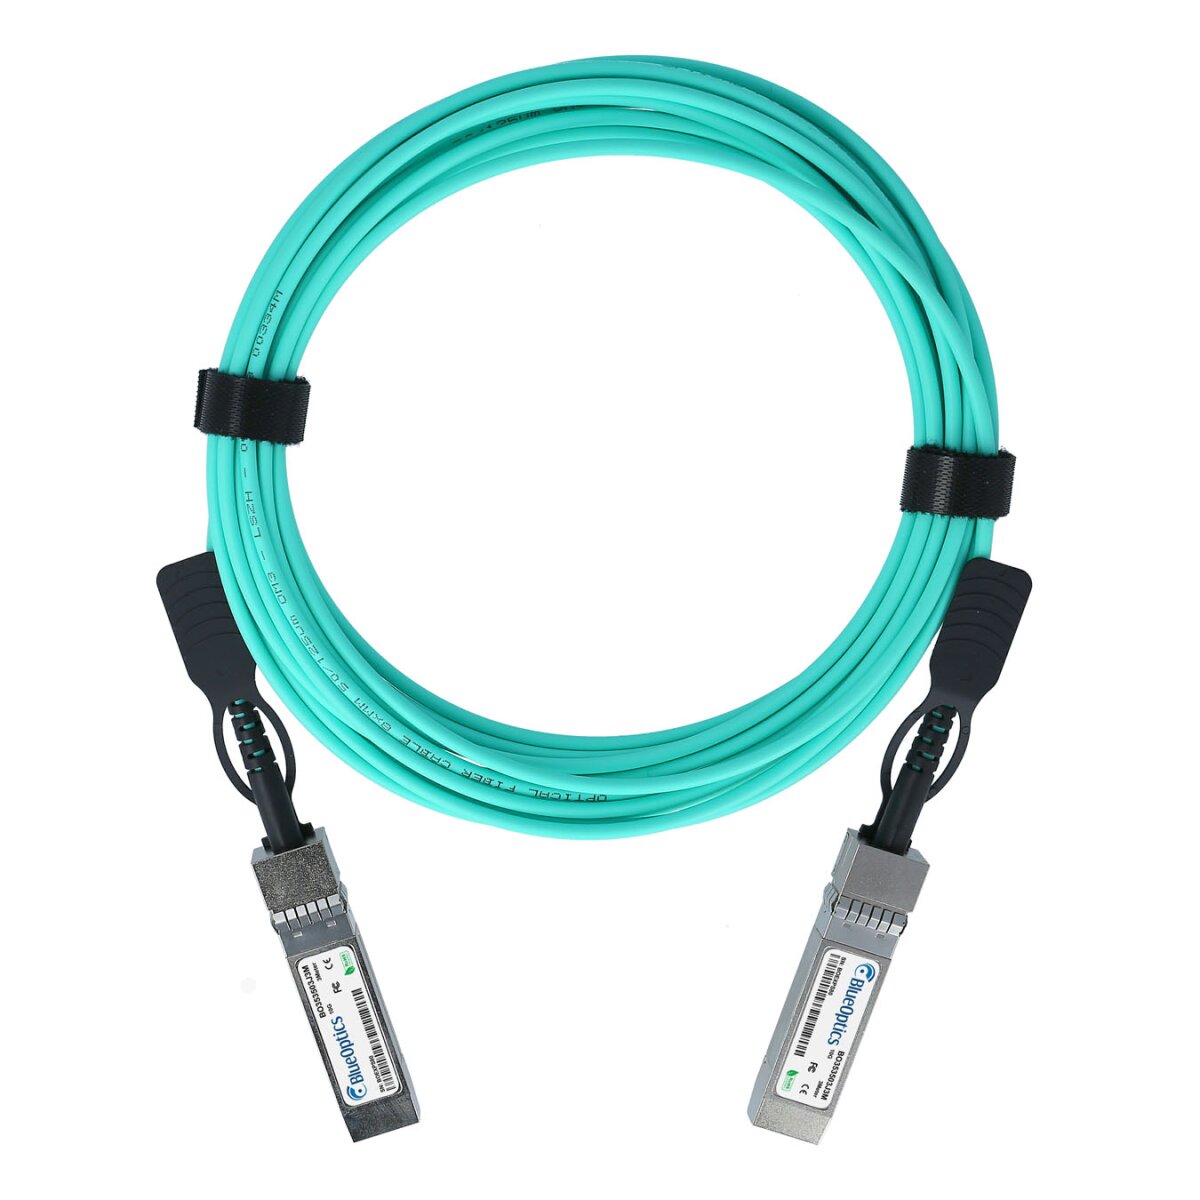 Cheap cables & adapters in the OCTO IT AG online shop